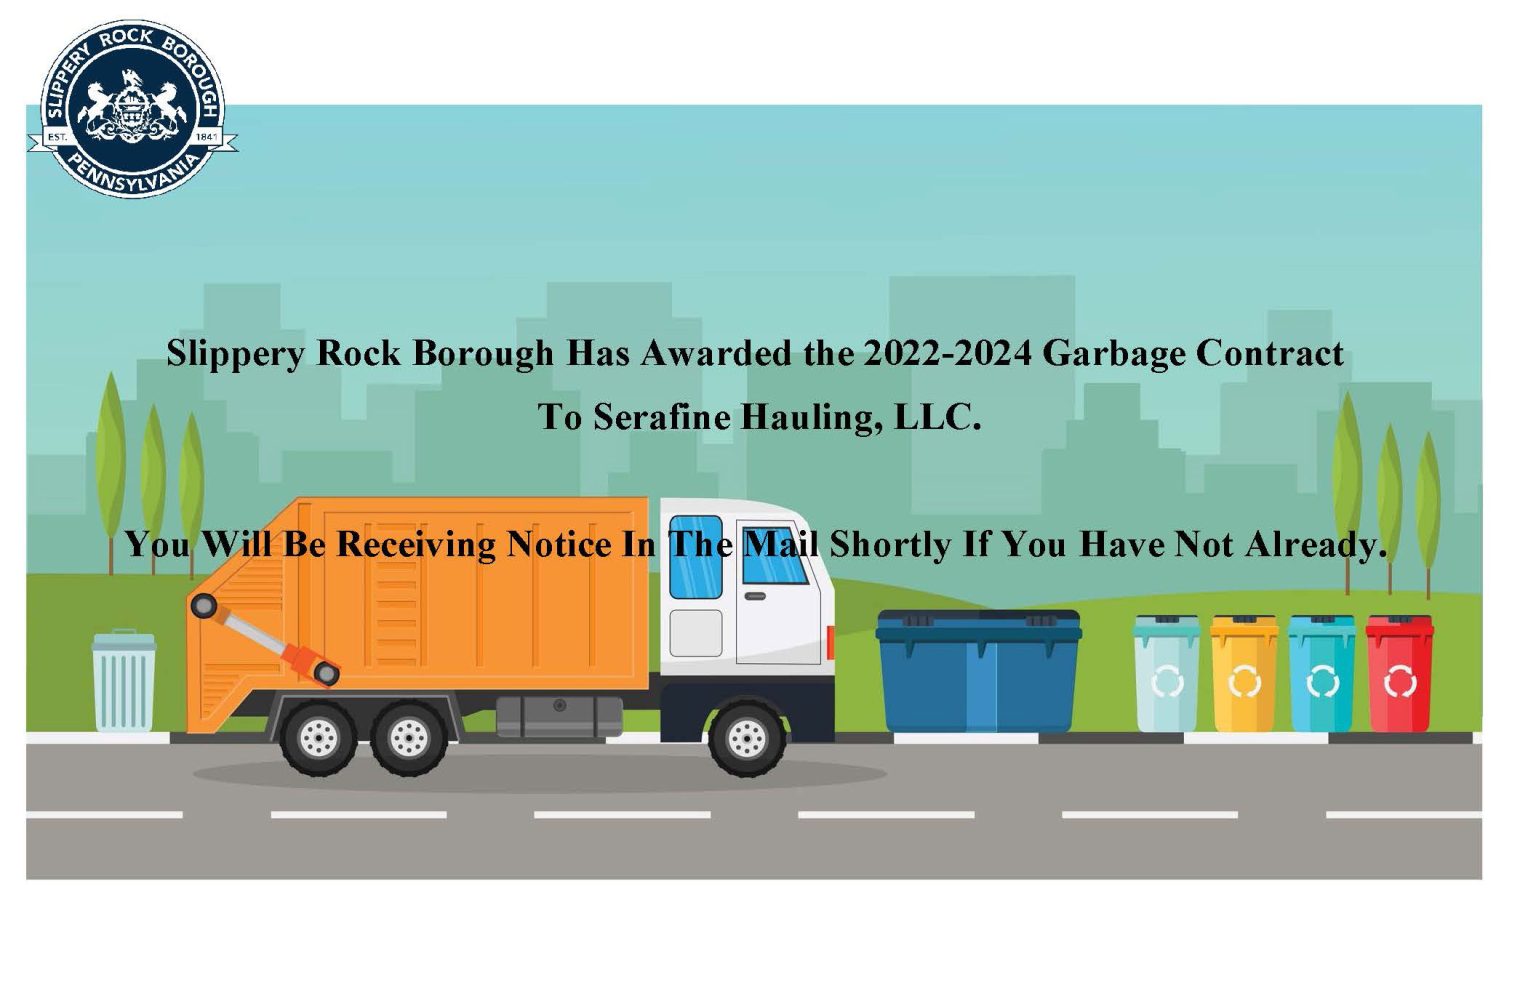 20222024 Garbage Contract